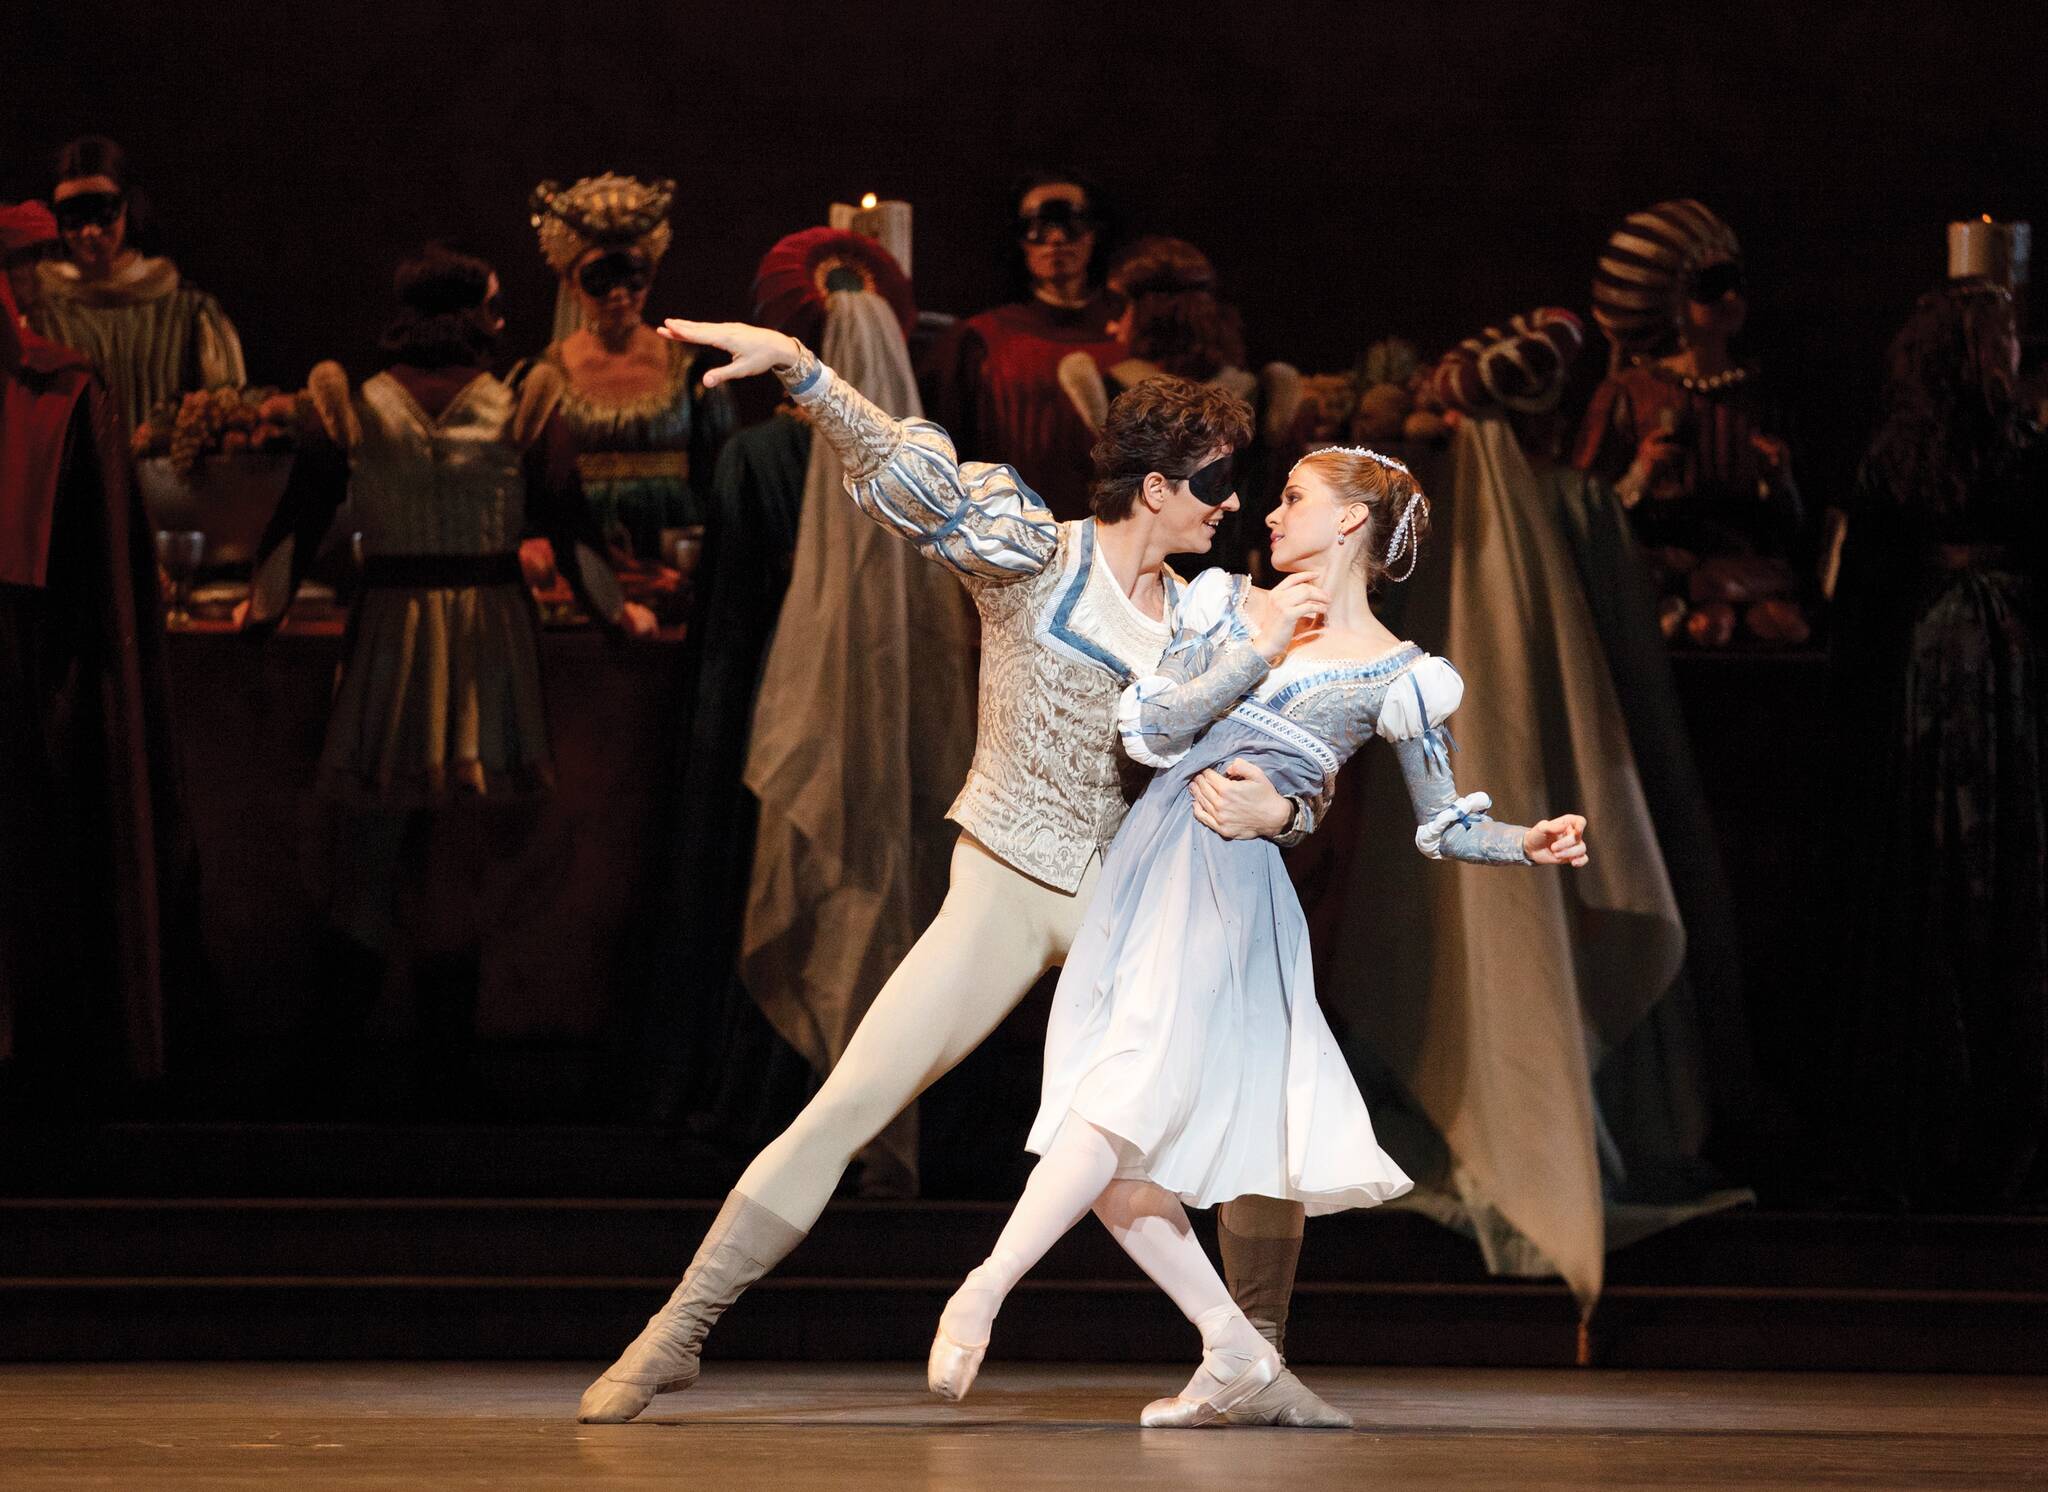 National Ballet of Canada presents ROMEO and JULIET